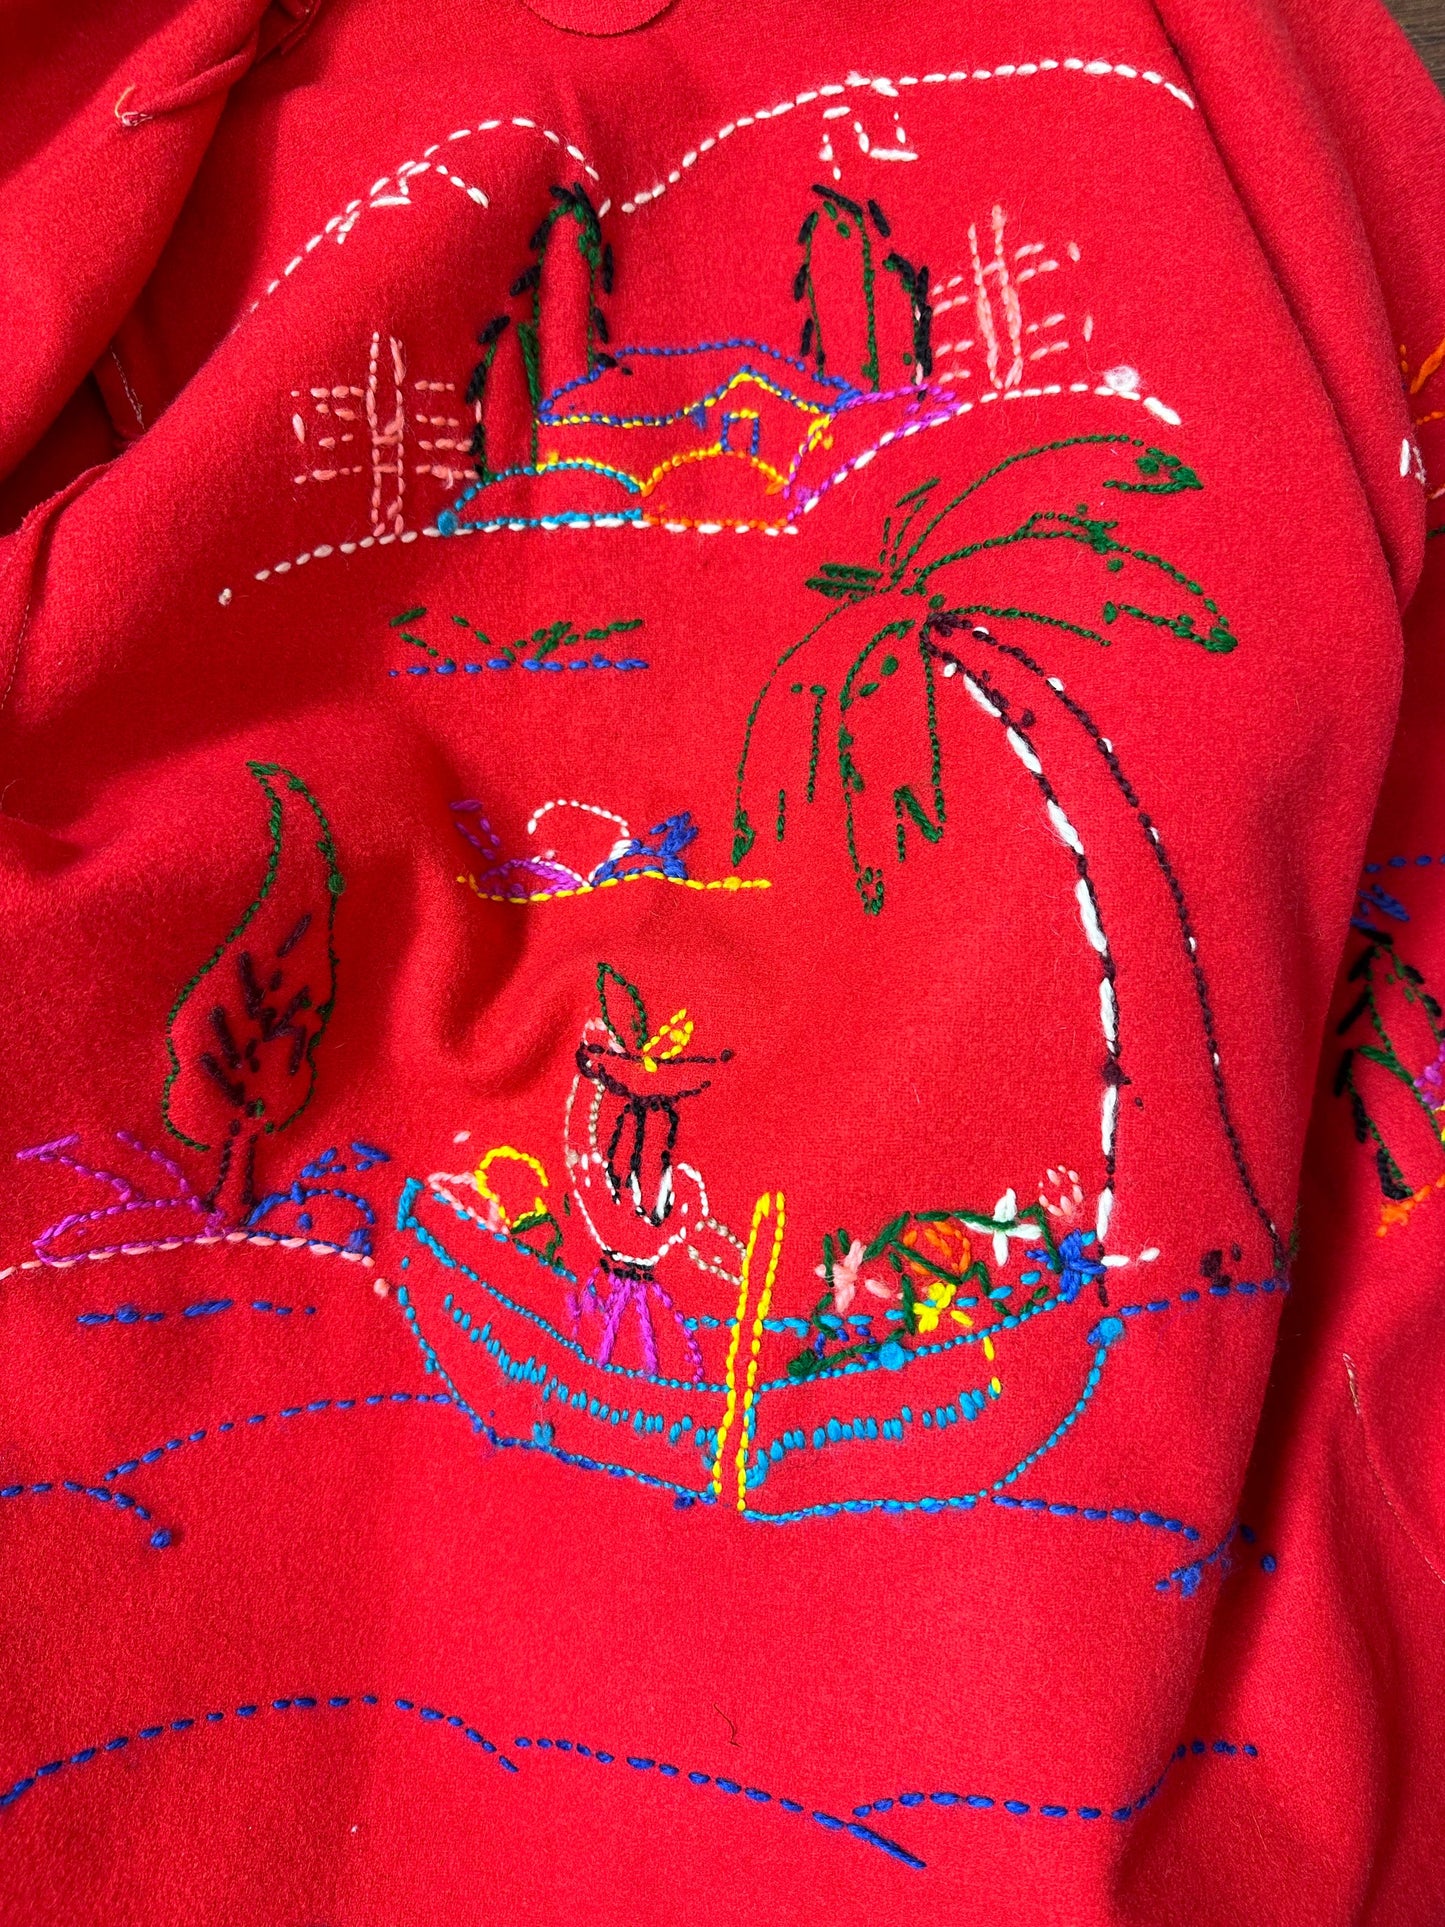 1940s/50s Red Embroidered Mexican Tourist Jacket, Size Small